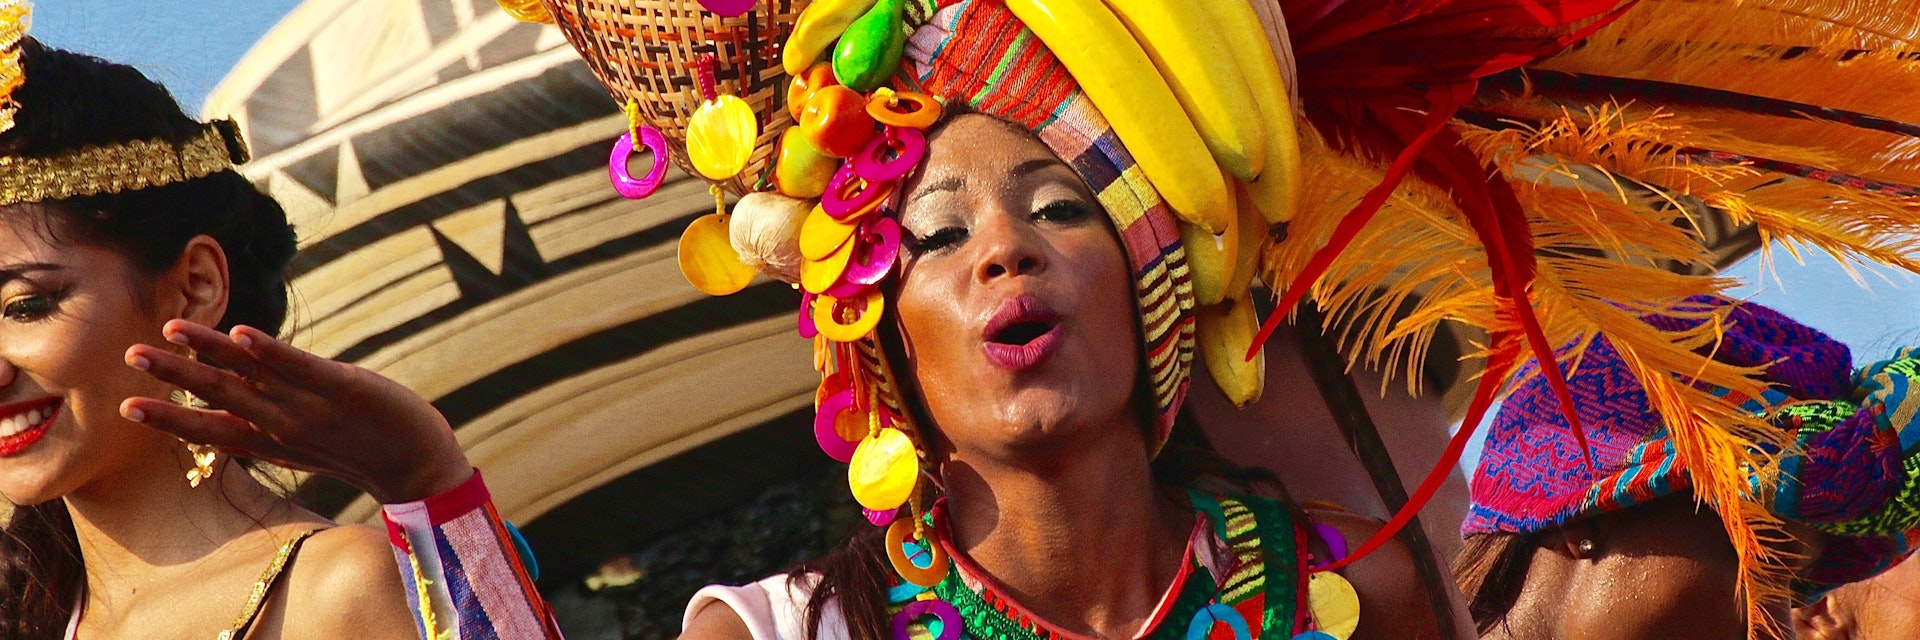 Celebrations in Cartagena, Colombia.